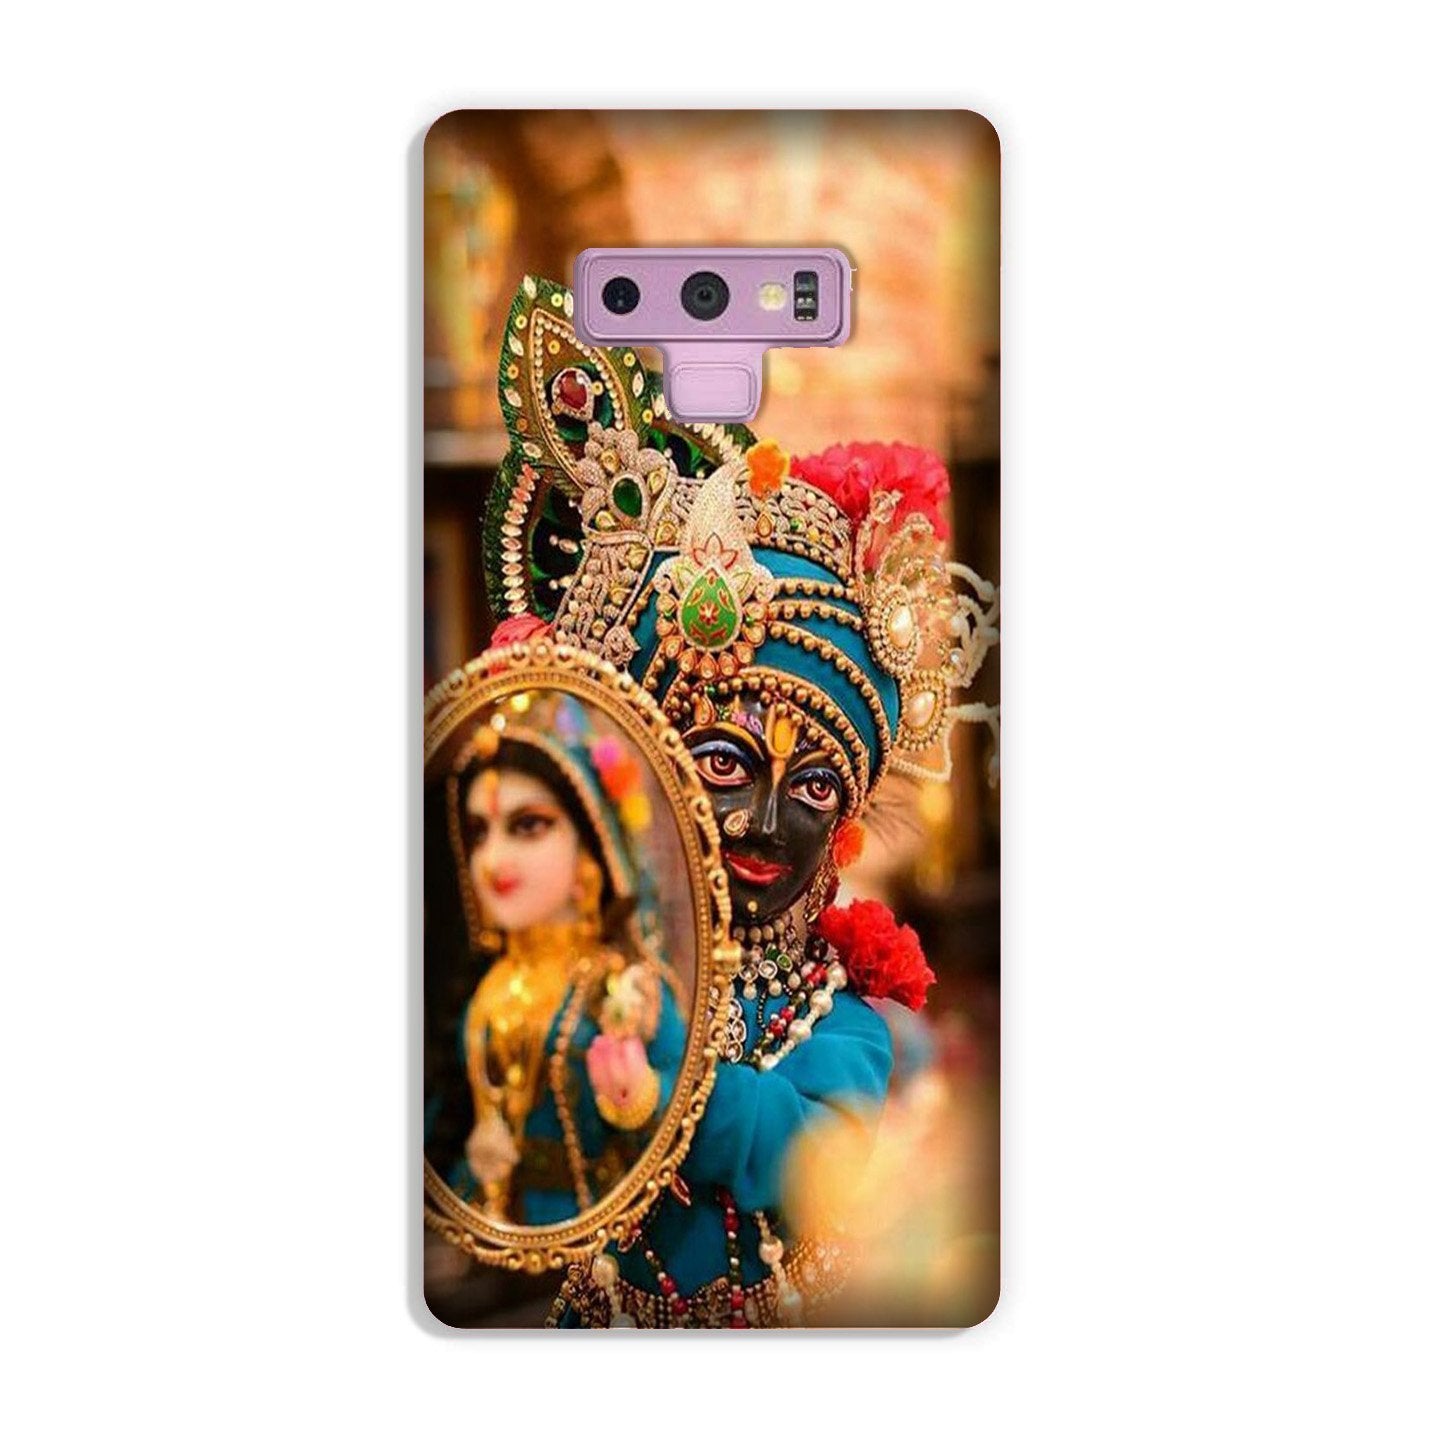 Lord Krishna5 Case for Galaxy Note 9